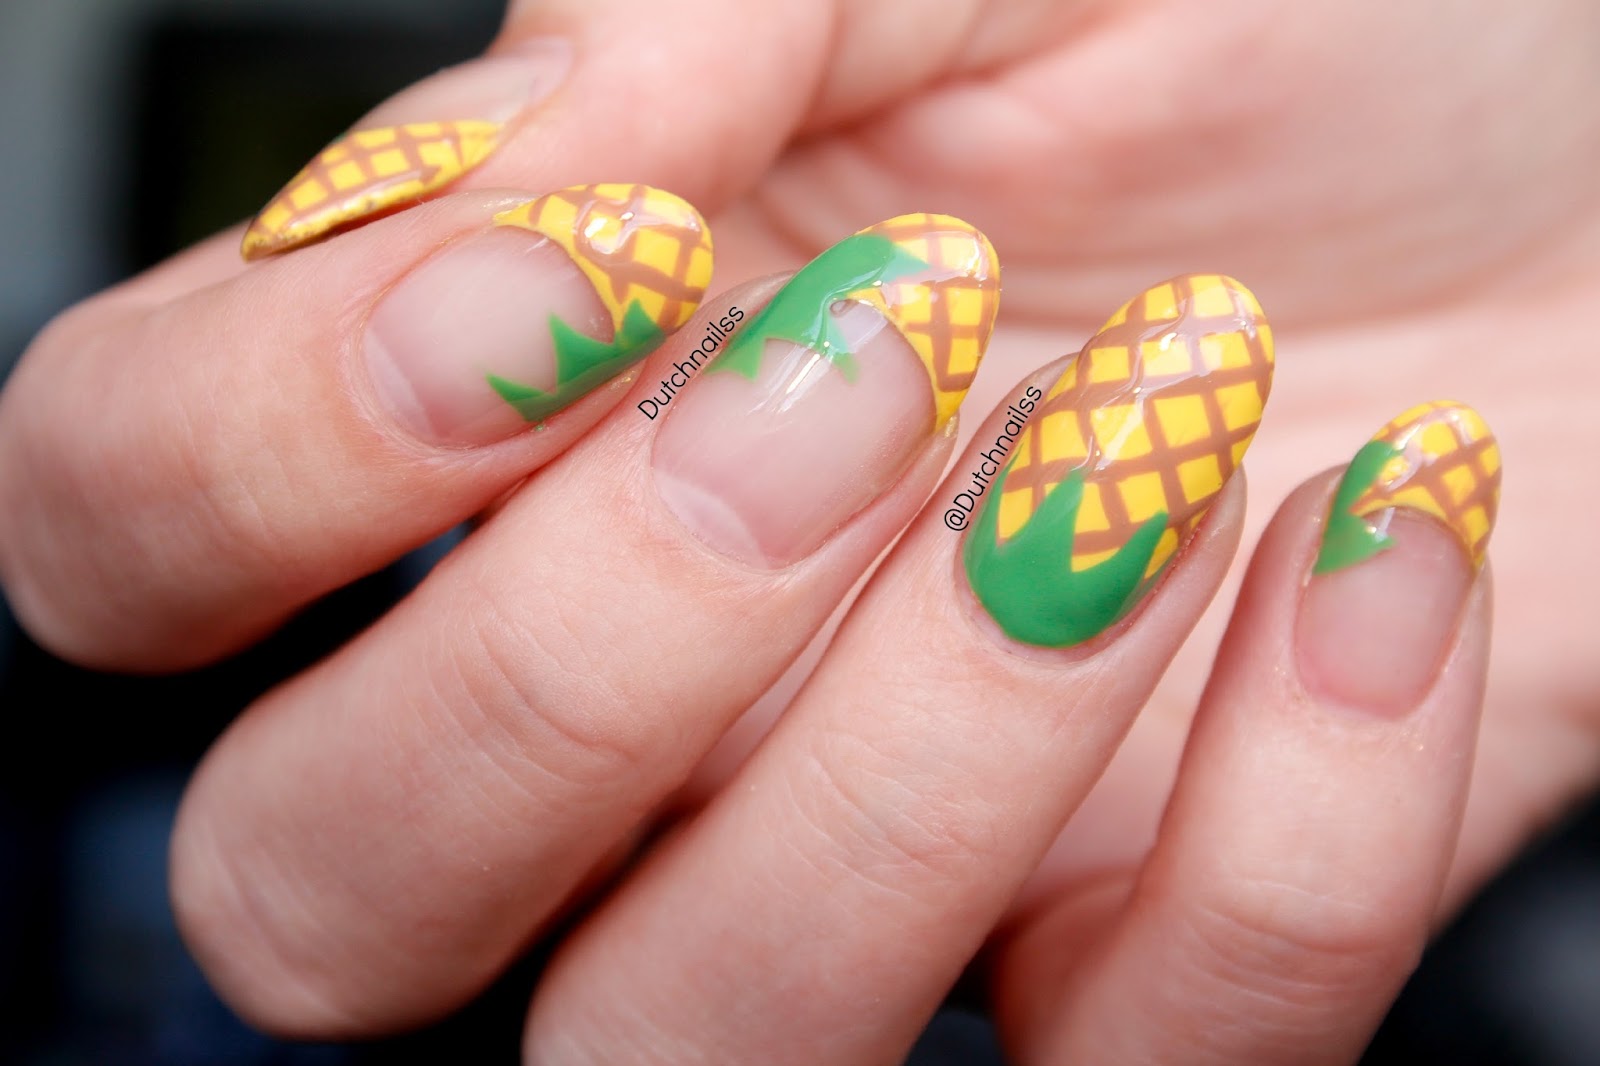 August Nail Art Challenge Inspiration - wide 11